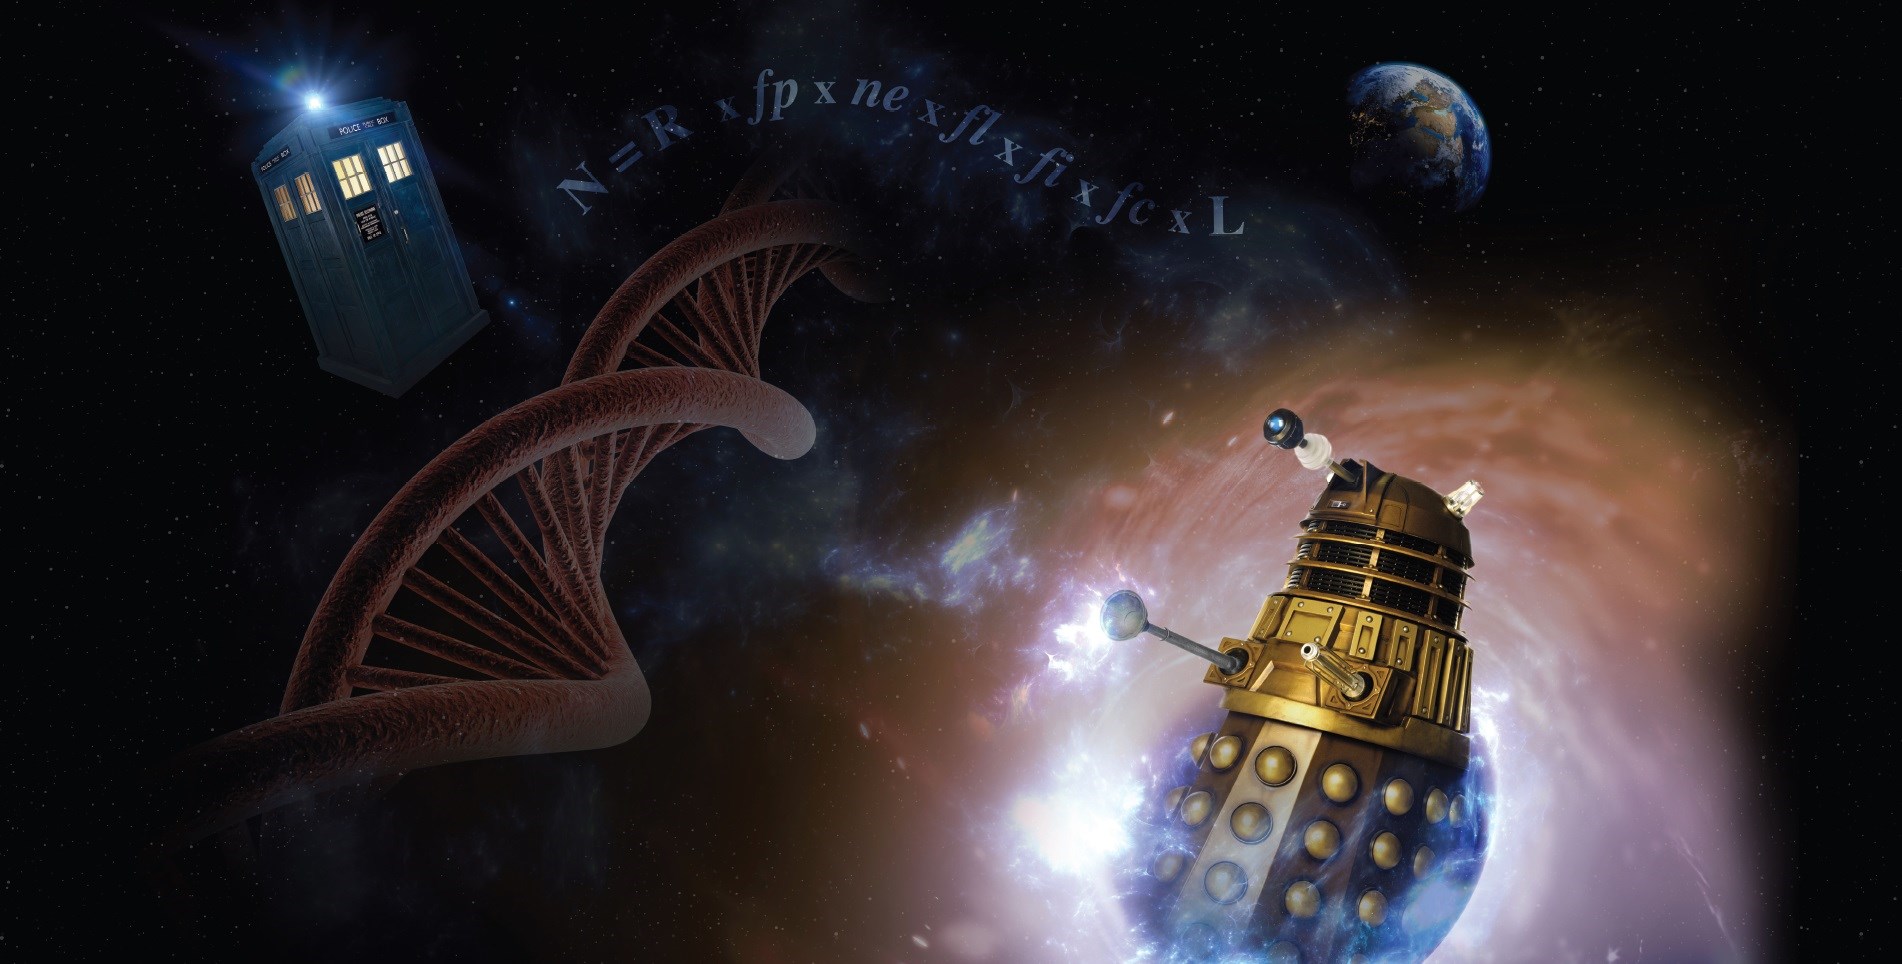 Dalek cyborg emerging from a vortex in space with a DNA double helix, police box, and earth in the background.